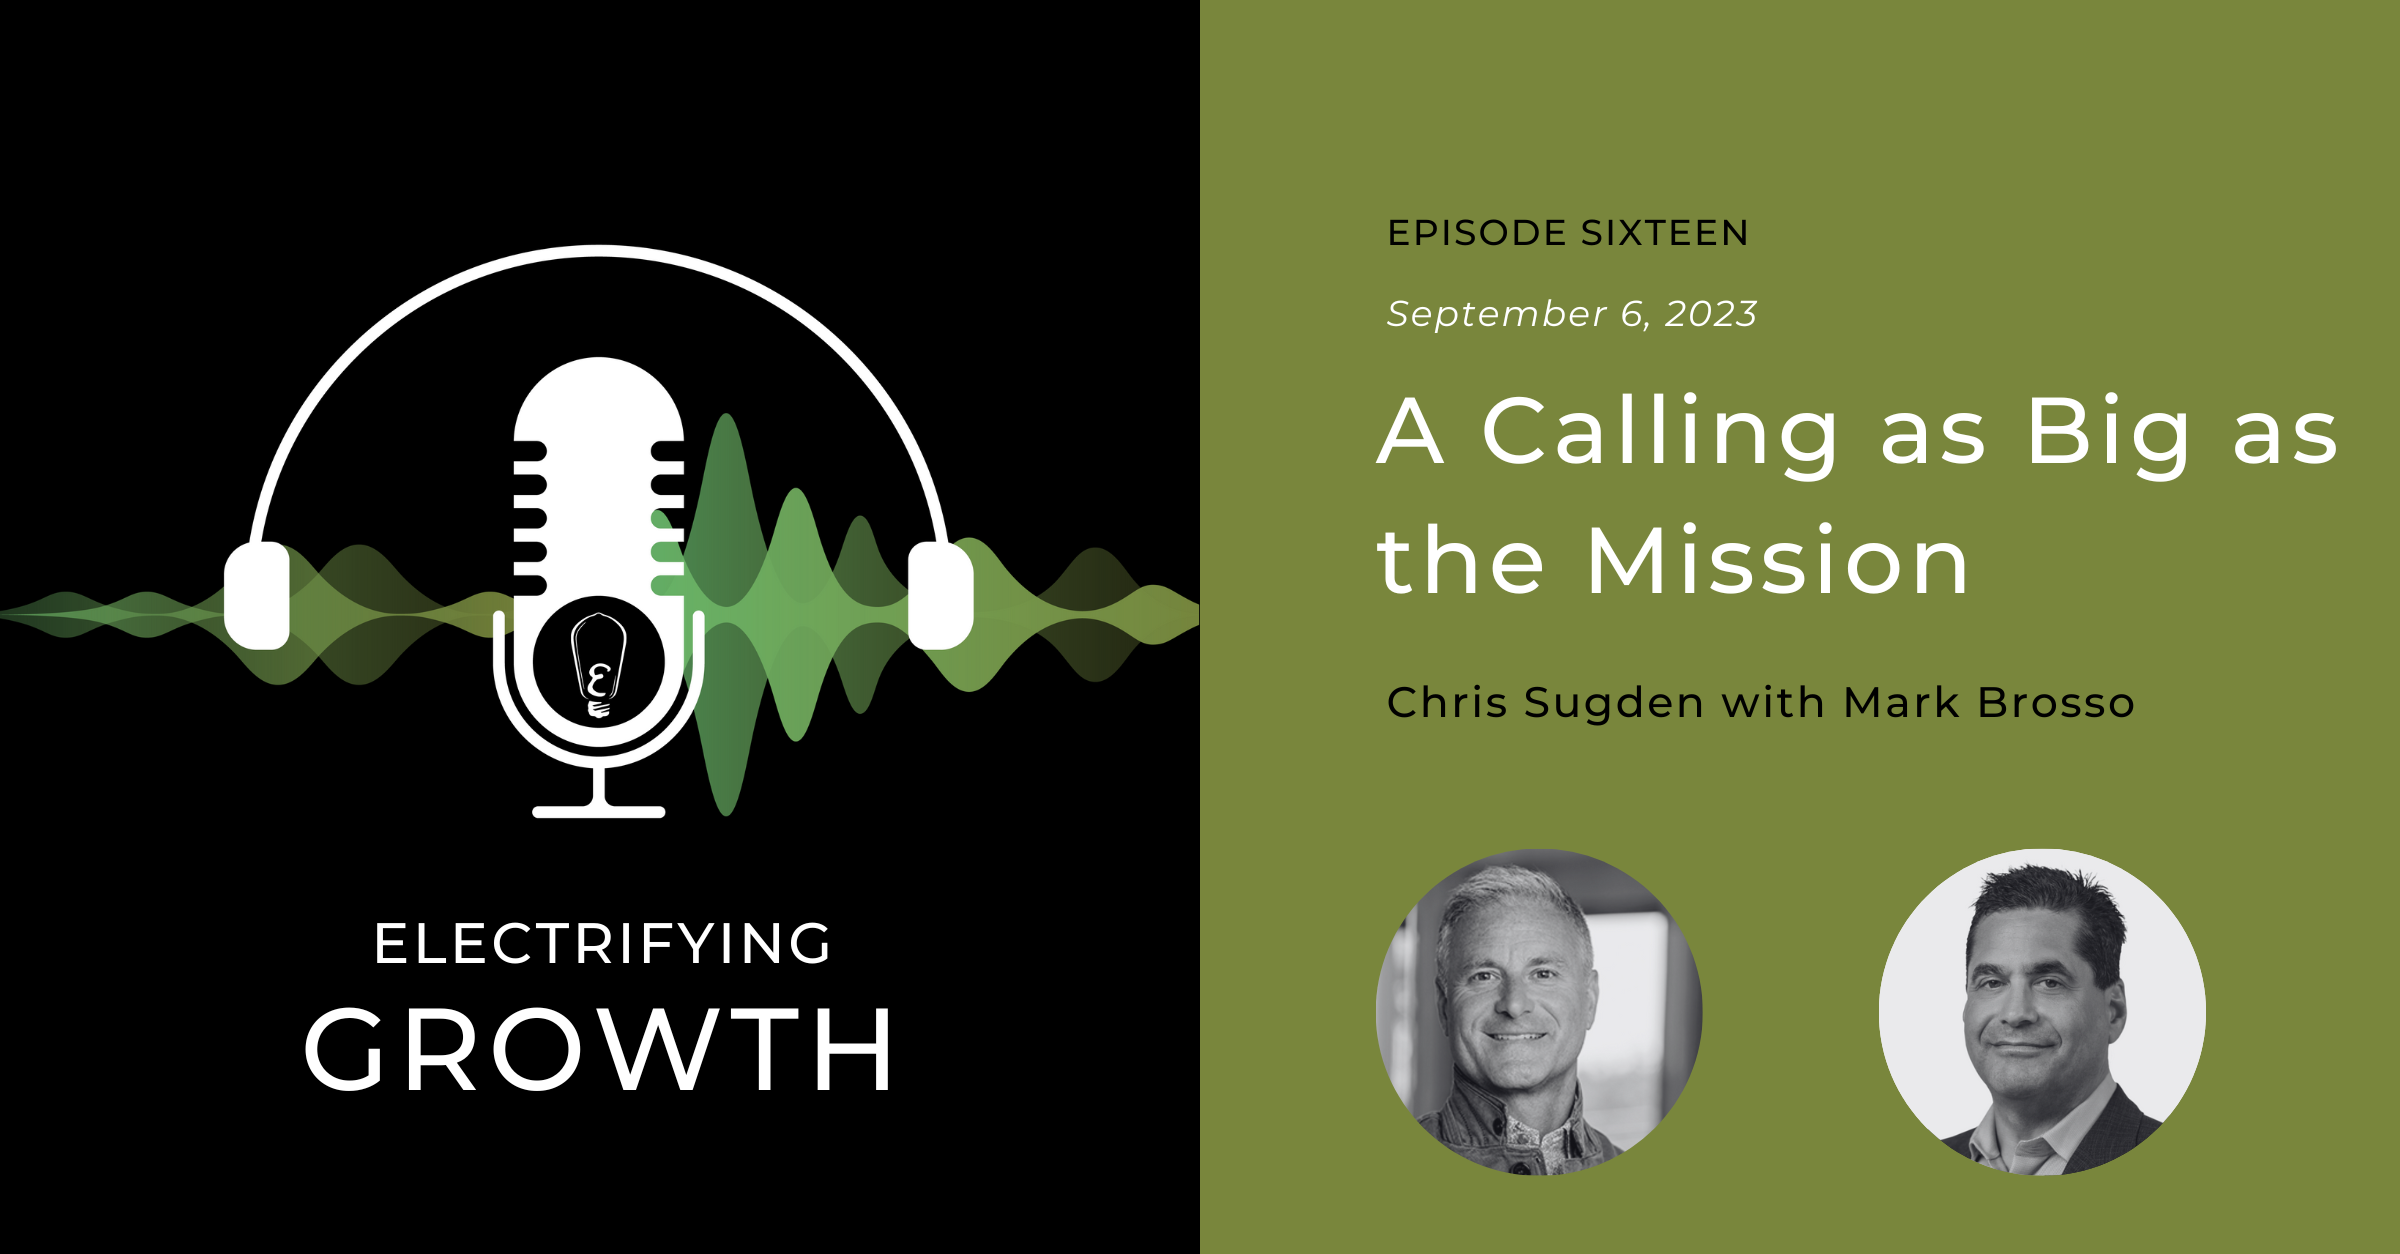 Electrifying Growth Episode 16: A Calling as Big as the Mission with Mark Brosso